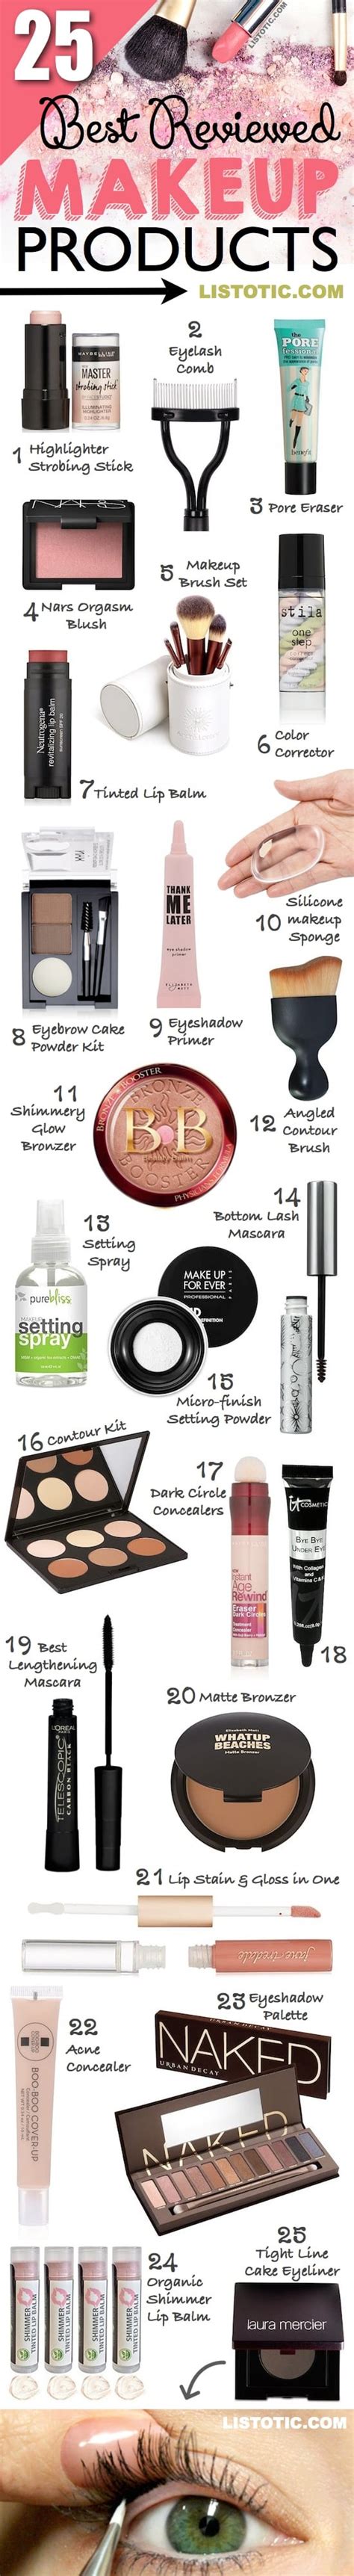 The 25 Best Makeup Products Every Girl Should Own